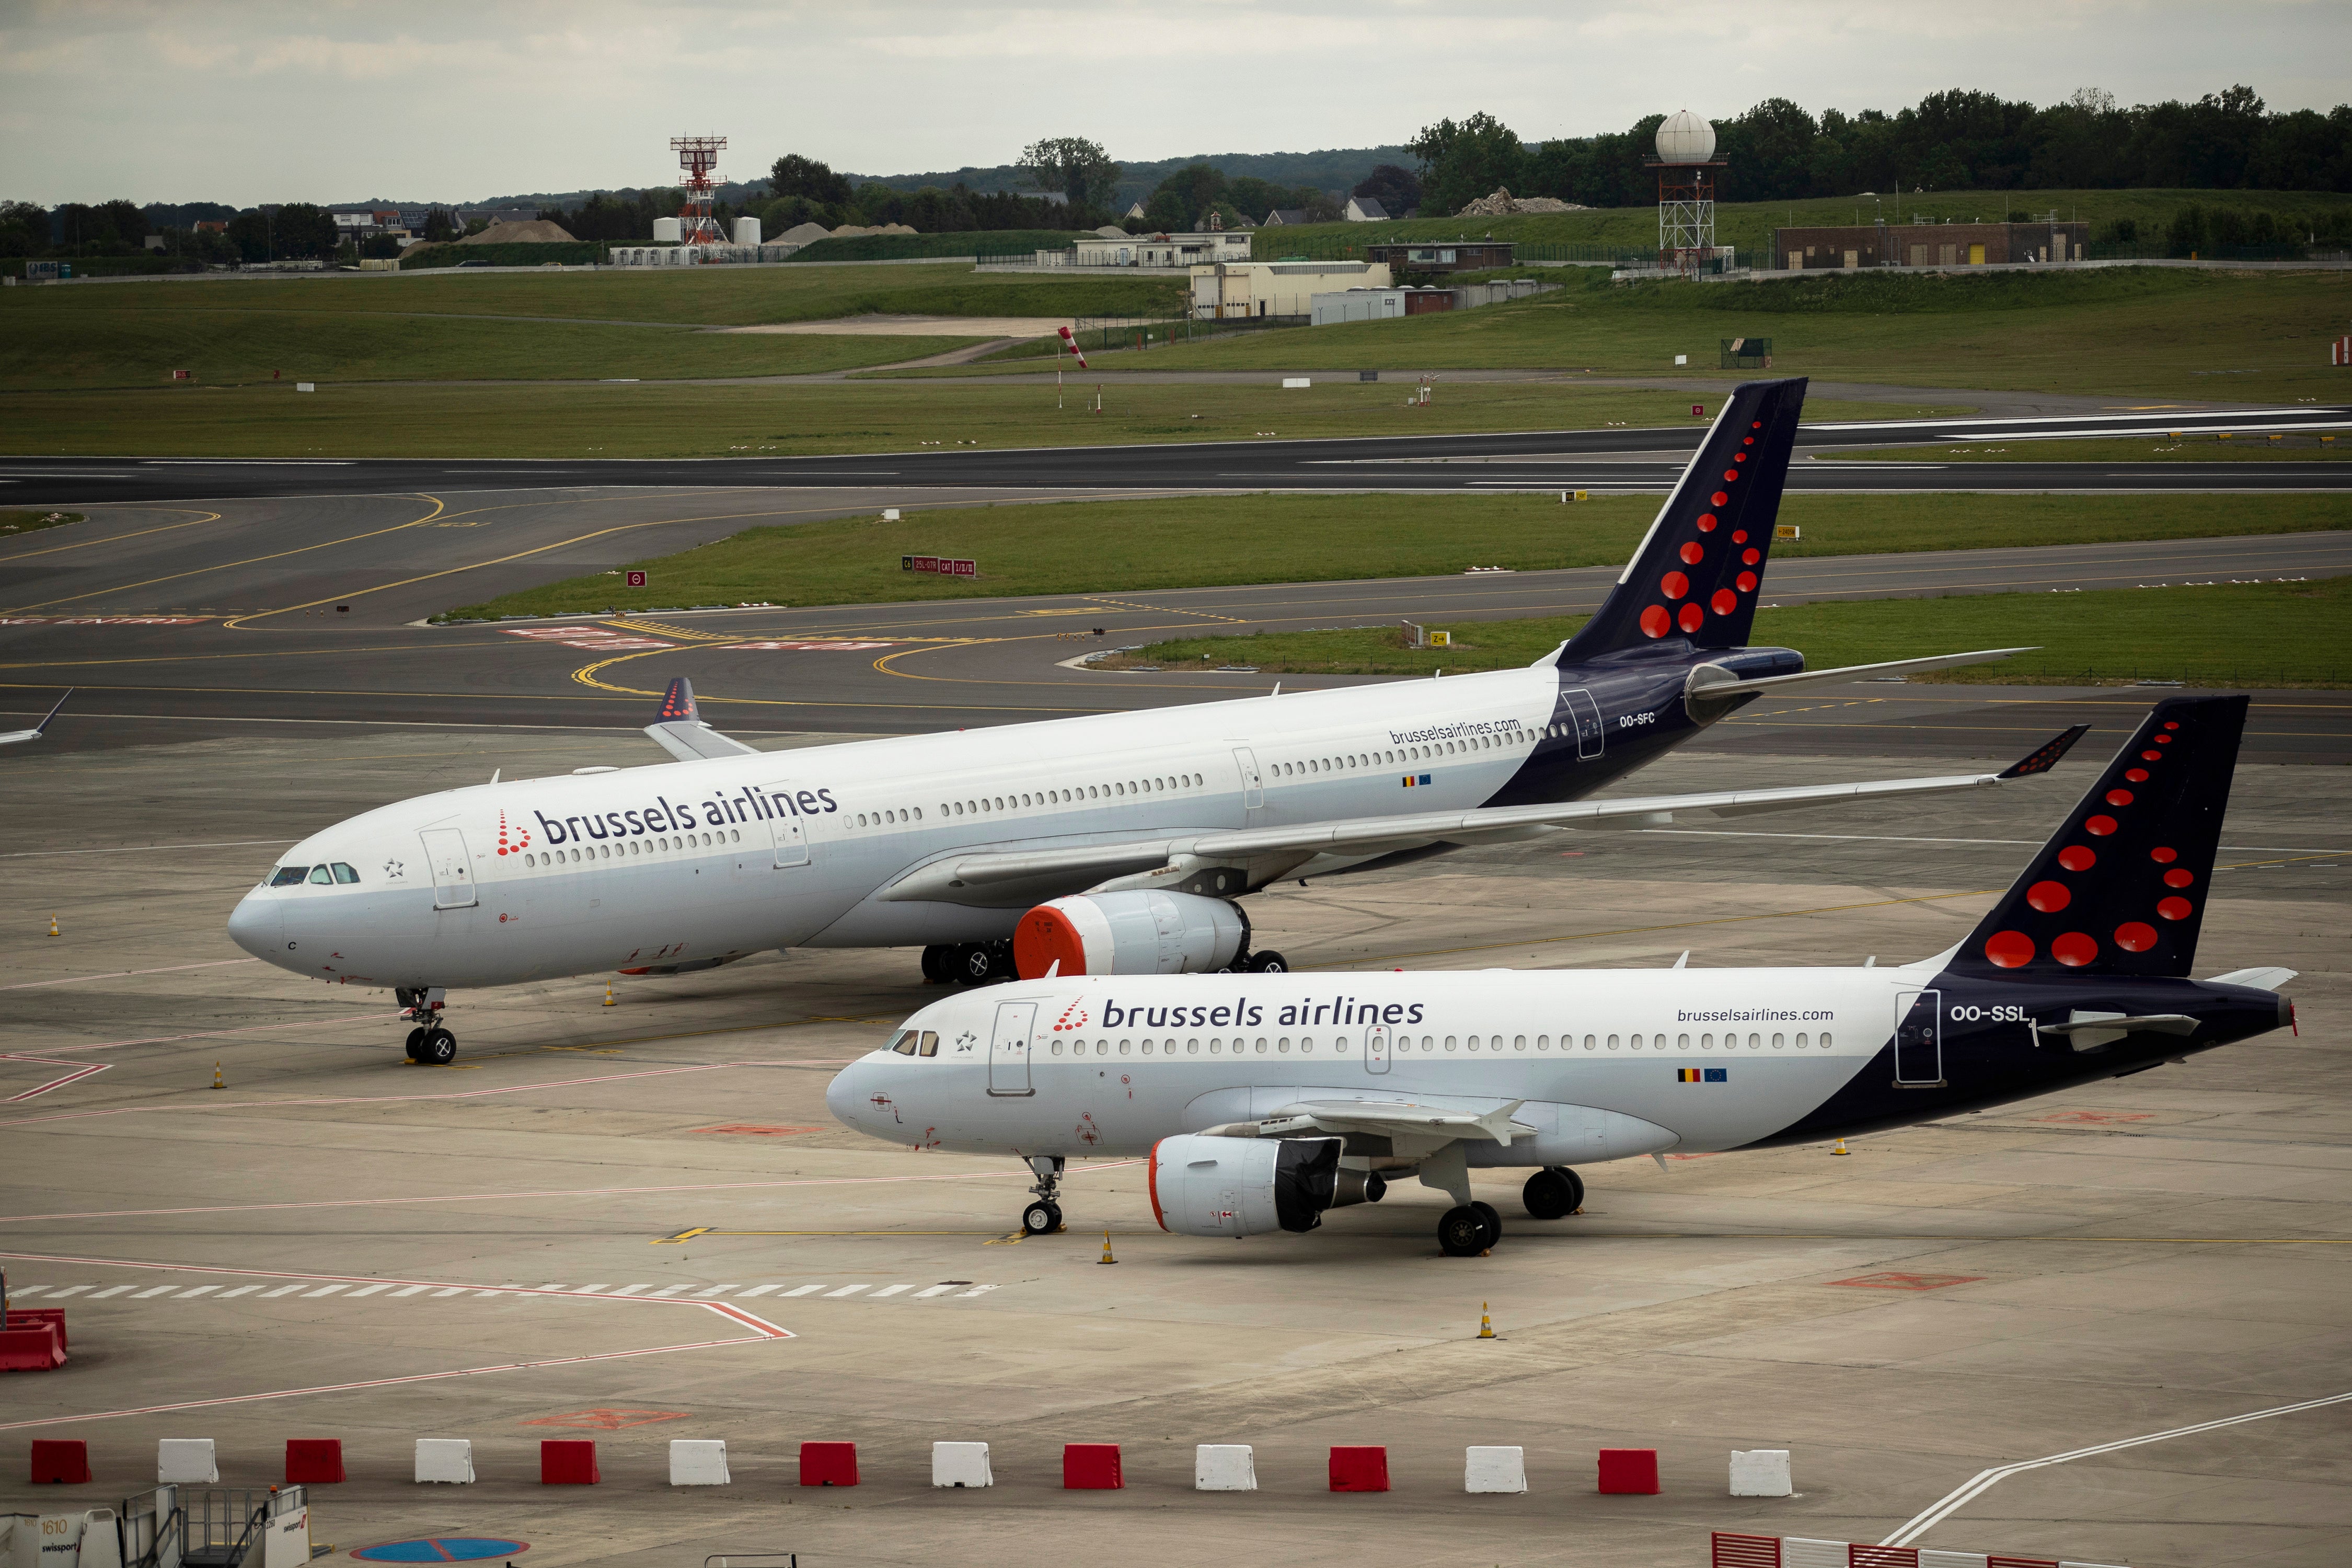 Ground stop: Brussels Airlines has cancelled outbound passenger flights